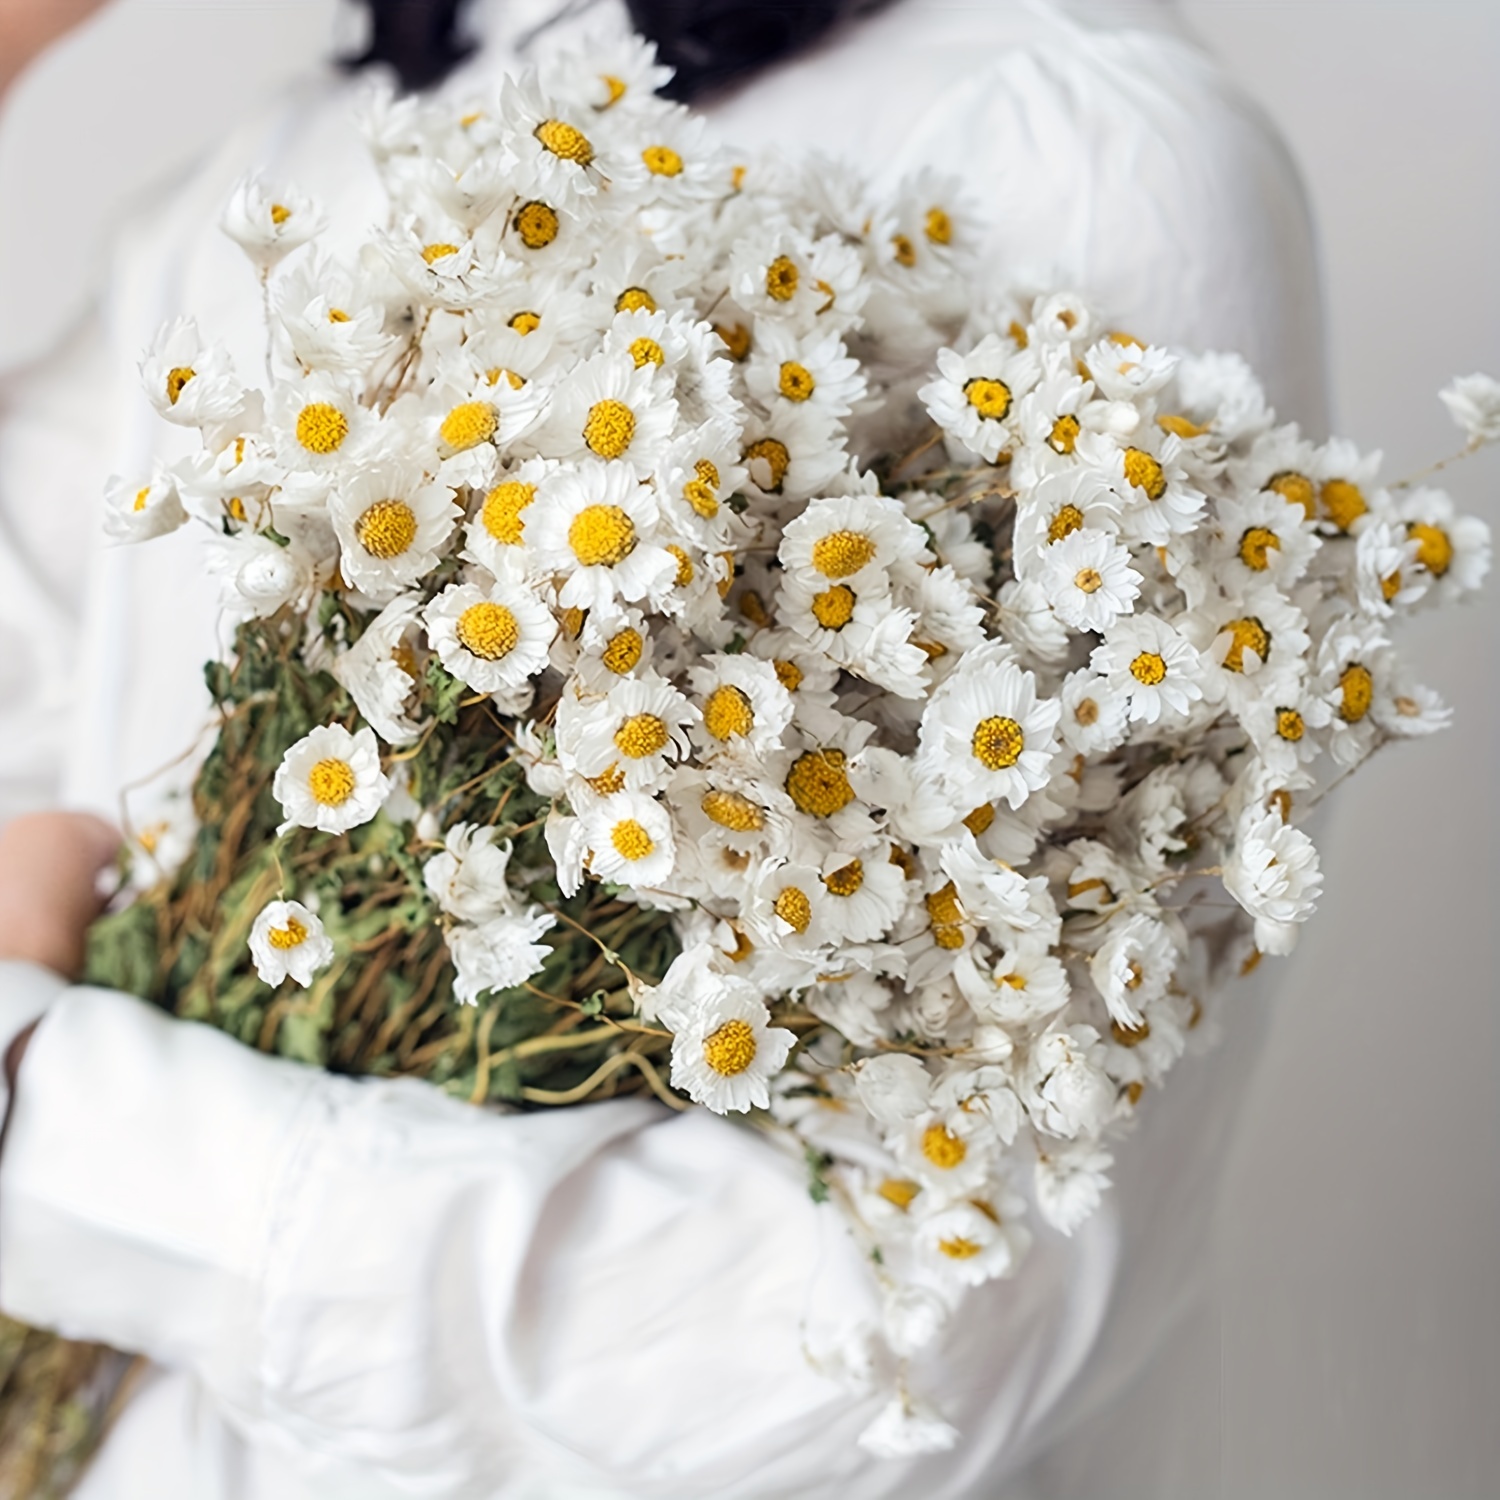 Teweiqi 200pcs Natural - Dried - Flowers Brazilian Small Star Daisy Dried Decorative Mini Chamomile Bouquet for Wedding Floral Arrangements Home Decor